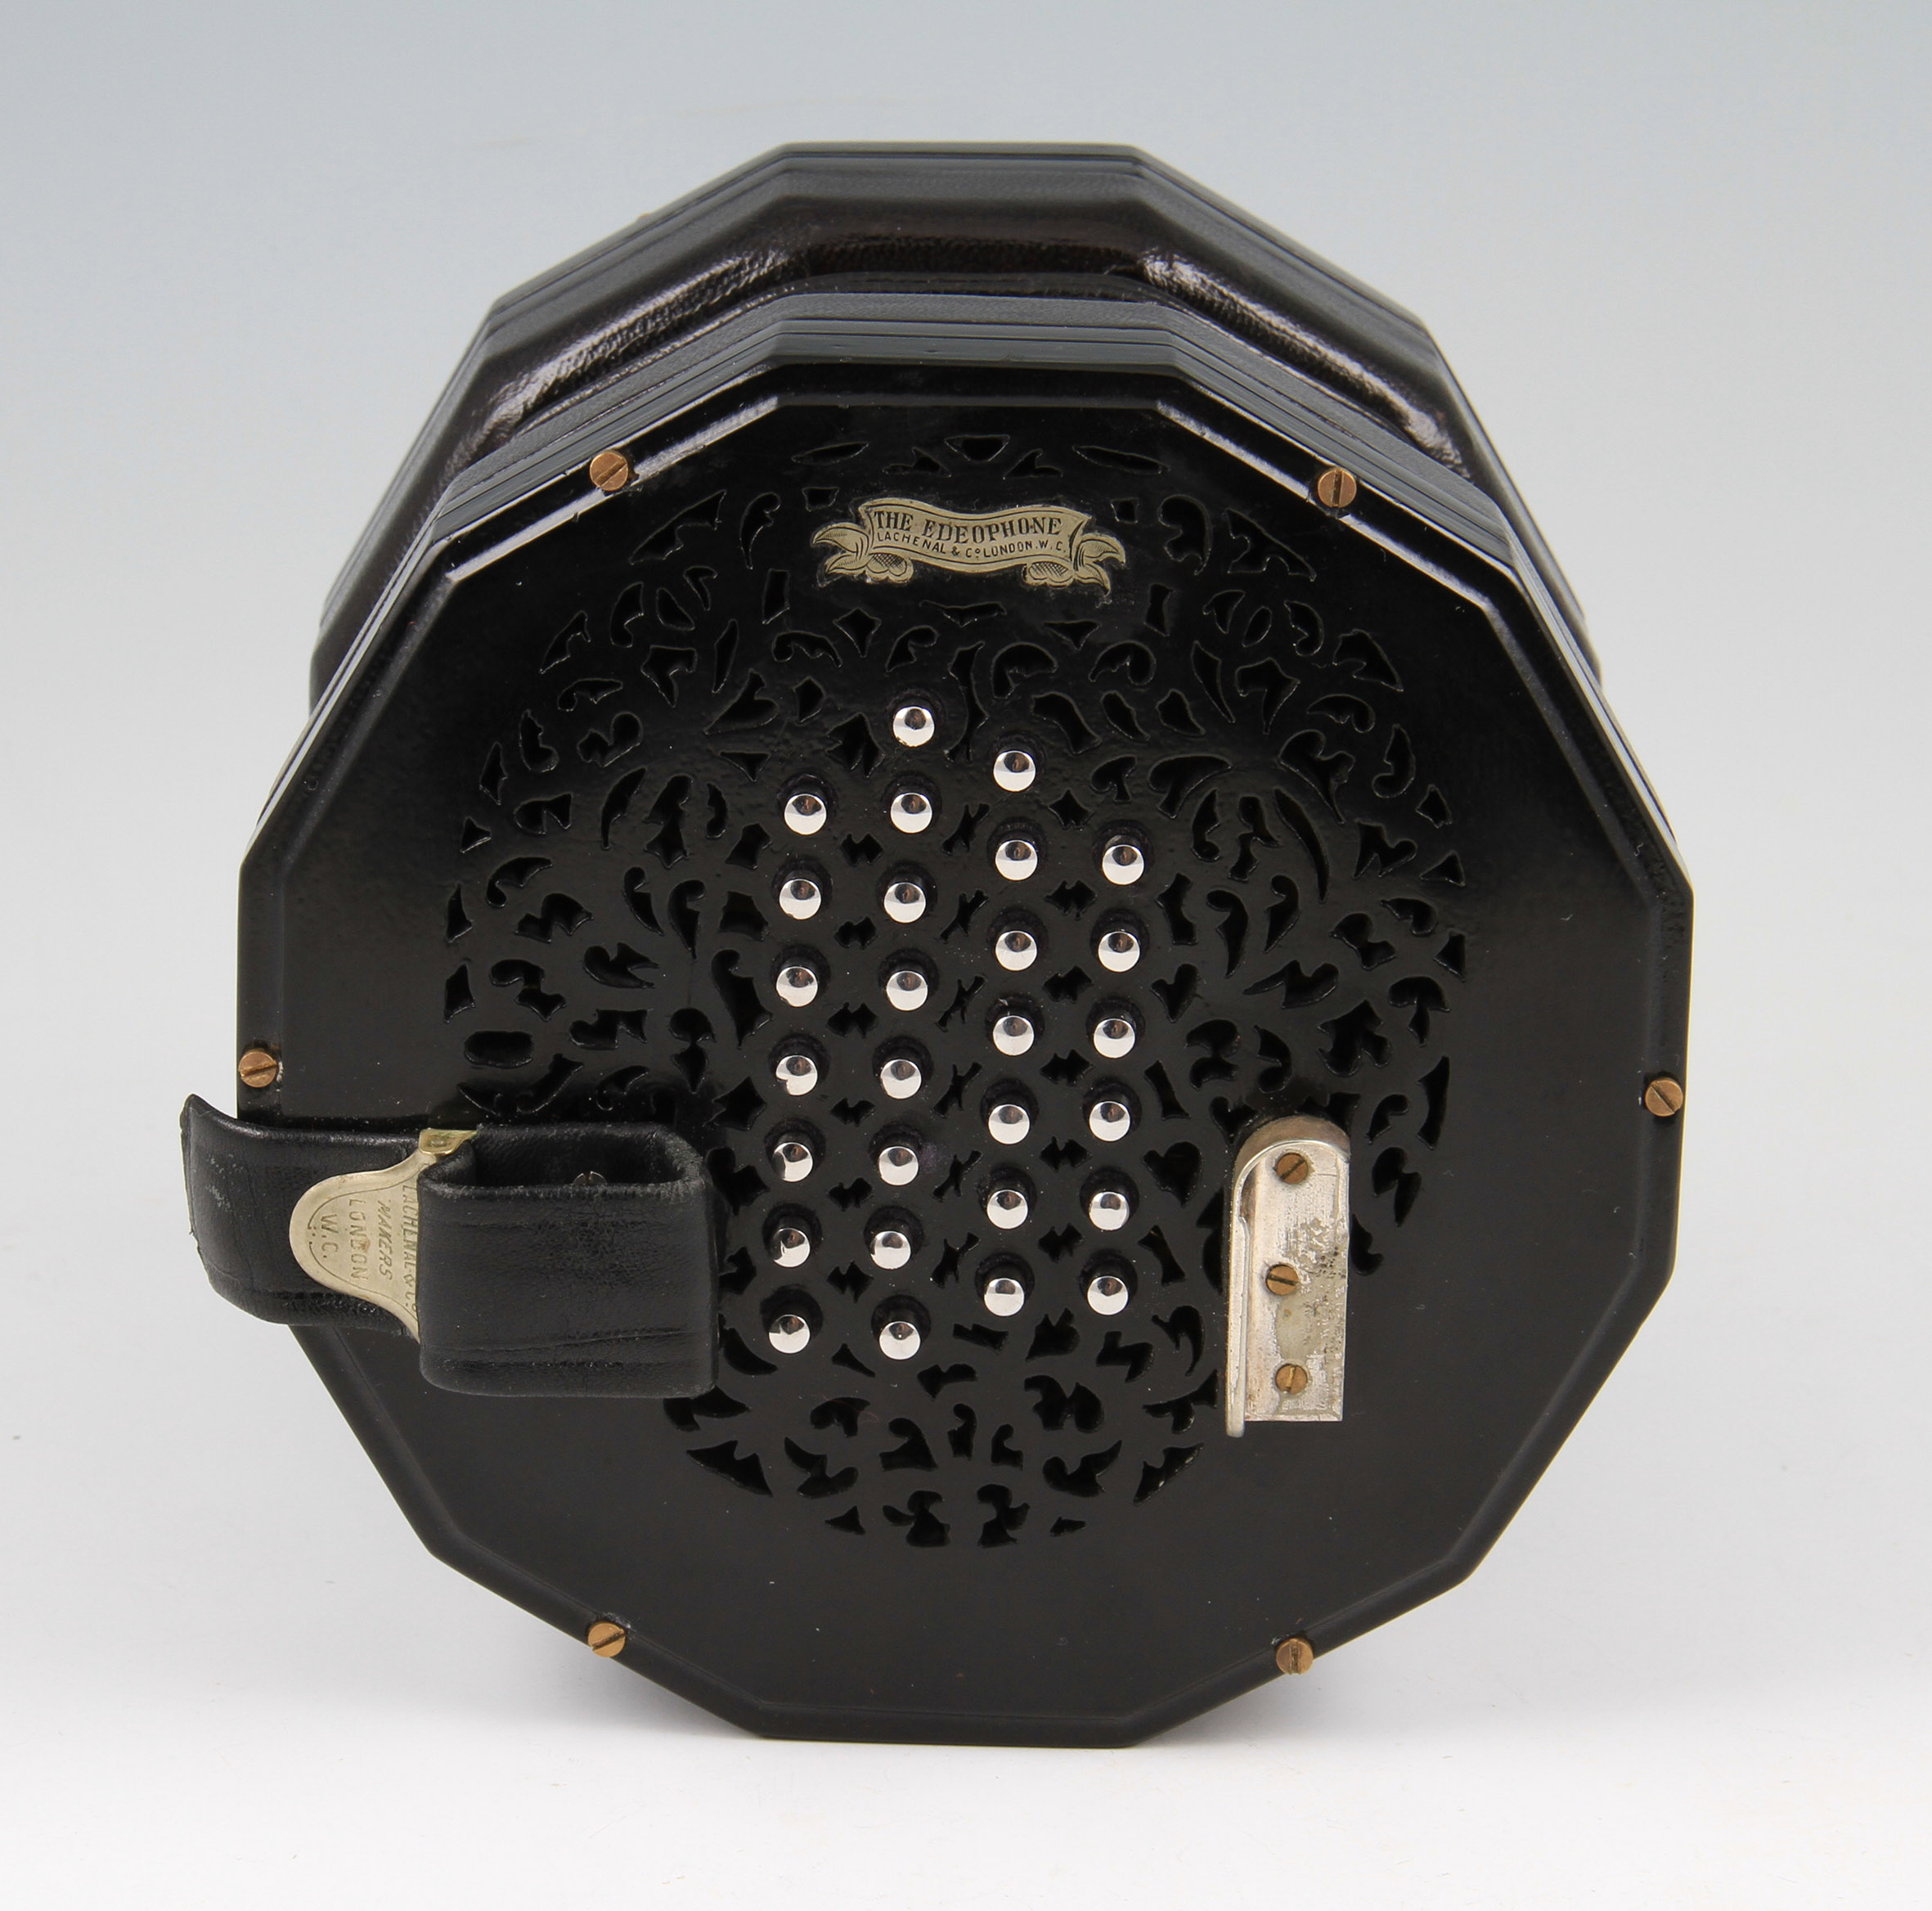 A Lachenal & Co 'The Edeophone' concertina, with black ebonized body with fretwork end sections with - Image 2 of 3